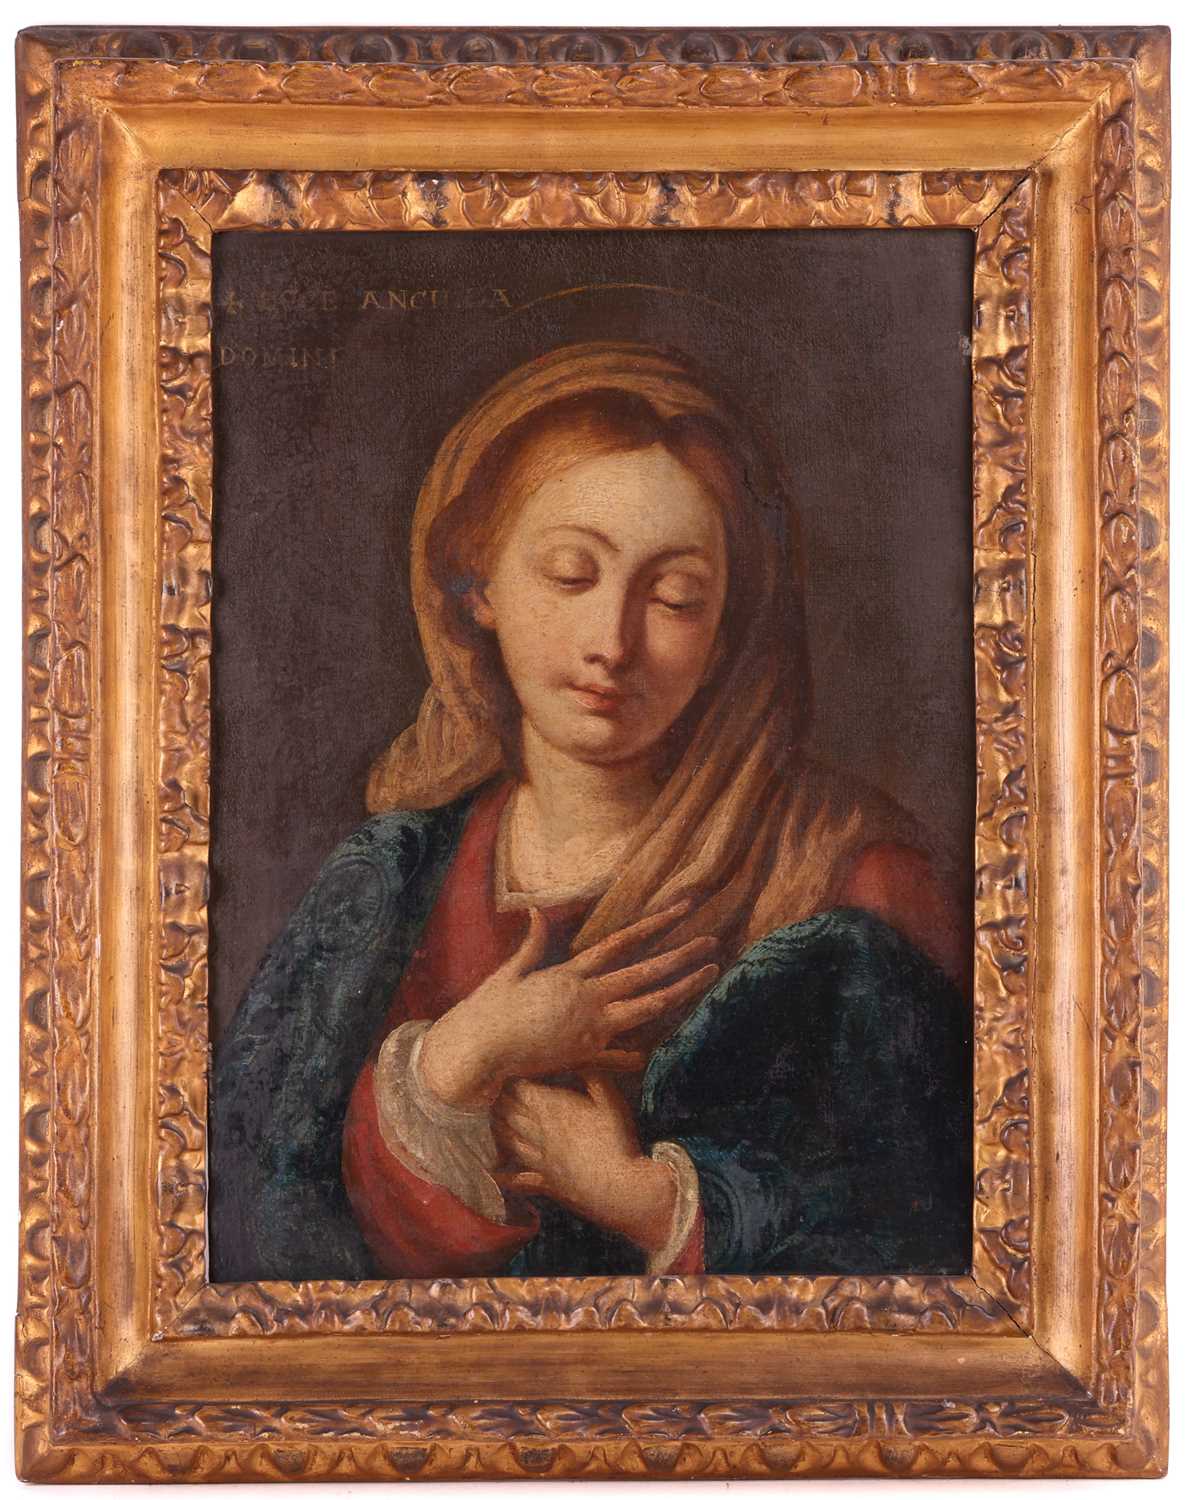 Italian School, late 17th century, Portrait of the Madonna in blue and red, inscribed top left 'Ecce - Image 2 of 7